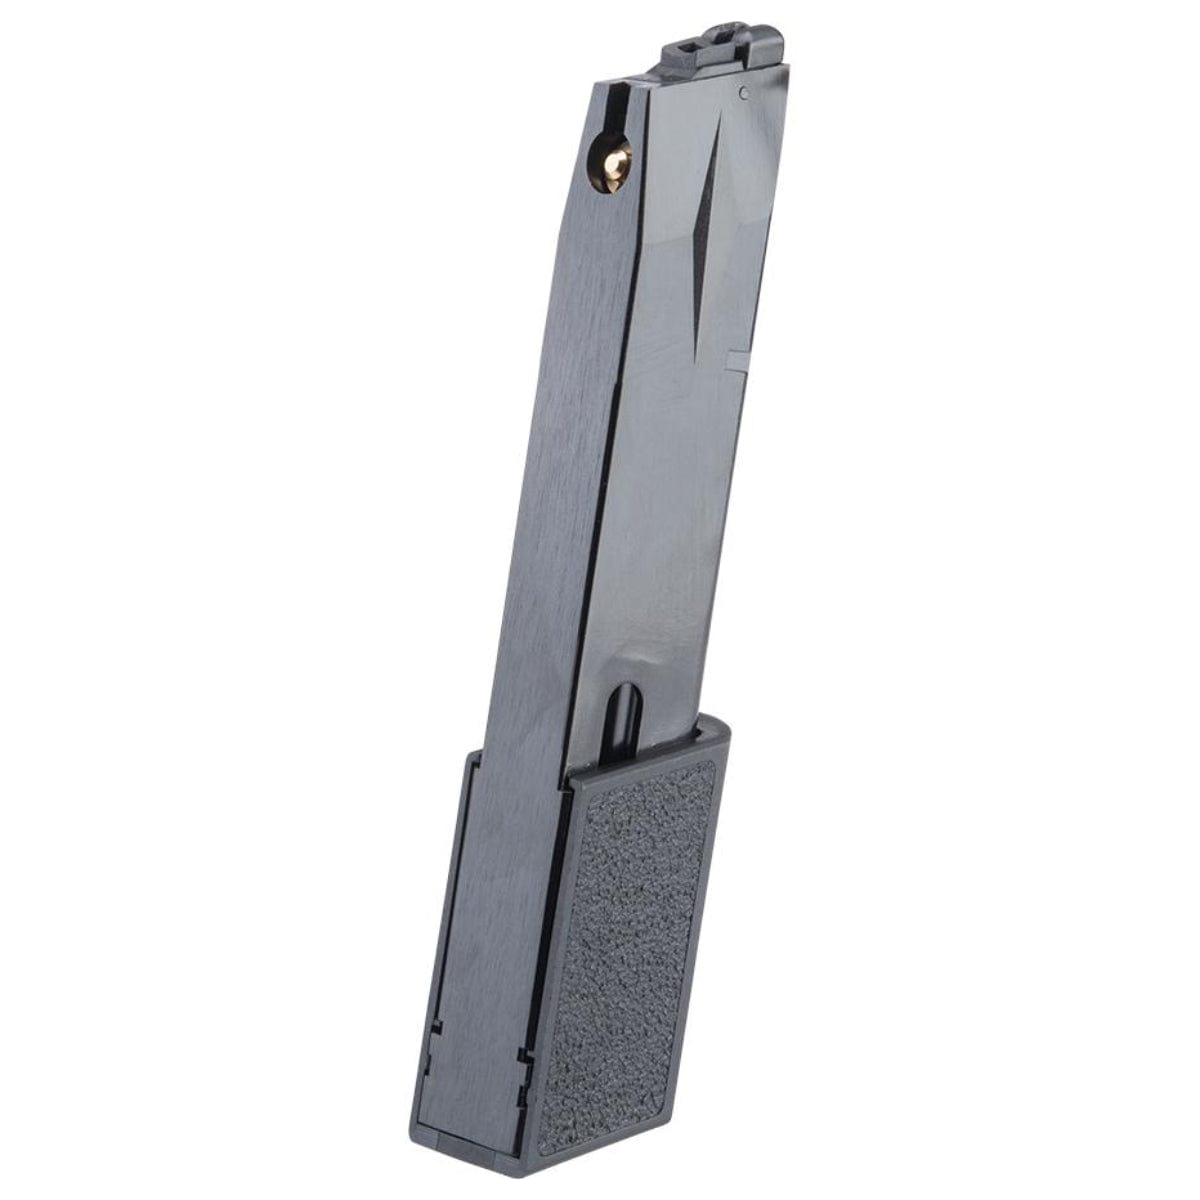 Airsportinggoods SRC SR92 GAS EXTENDED MAGAZINE 6MM AIRSOFT 33 ROUNDS